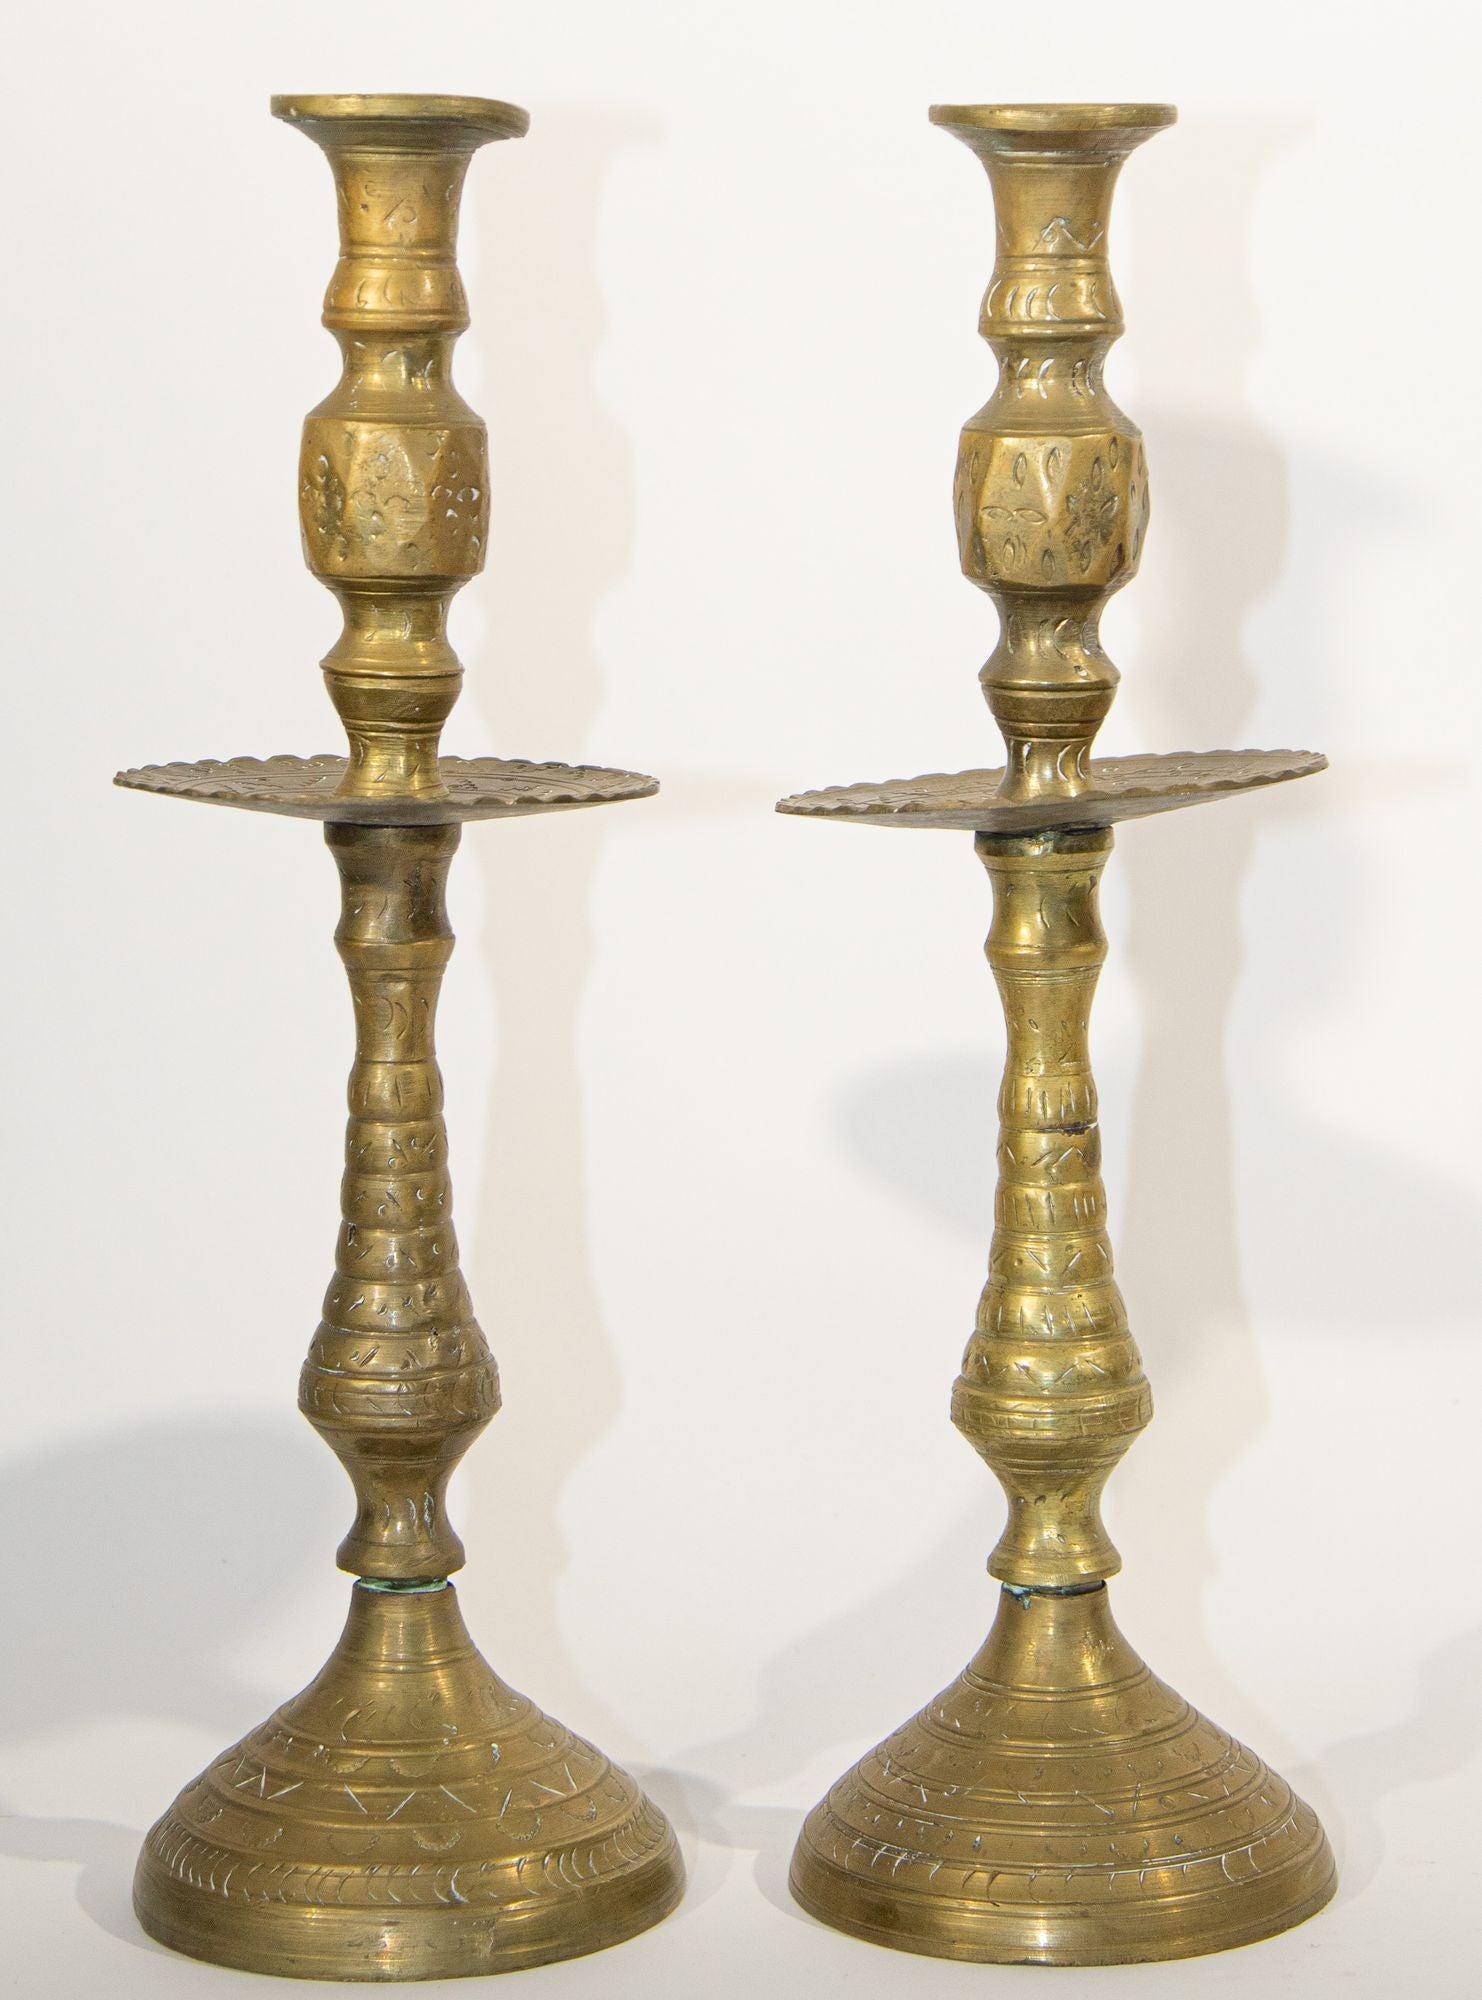 C19th Victorian Brass Candle Holders, Collectibles